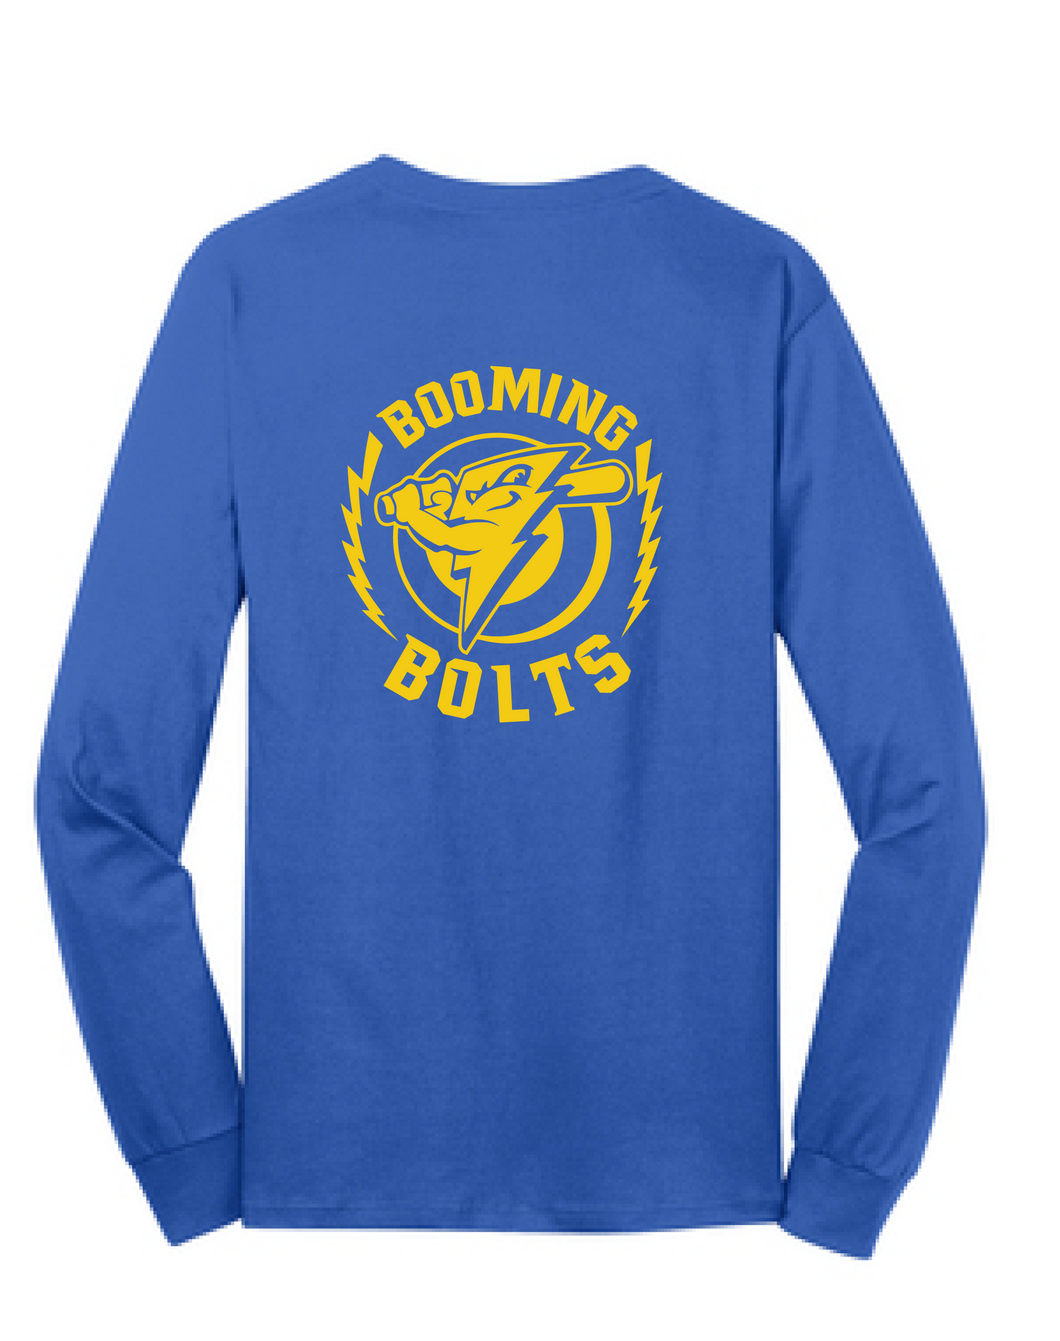 Long Sleeve Softstyle T-shirt (Youth & Adult) / Royal / Booming Bolts - Fidgety